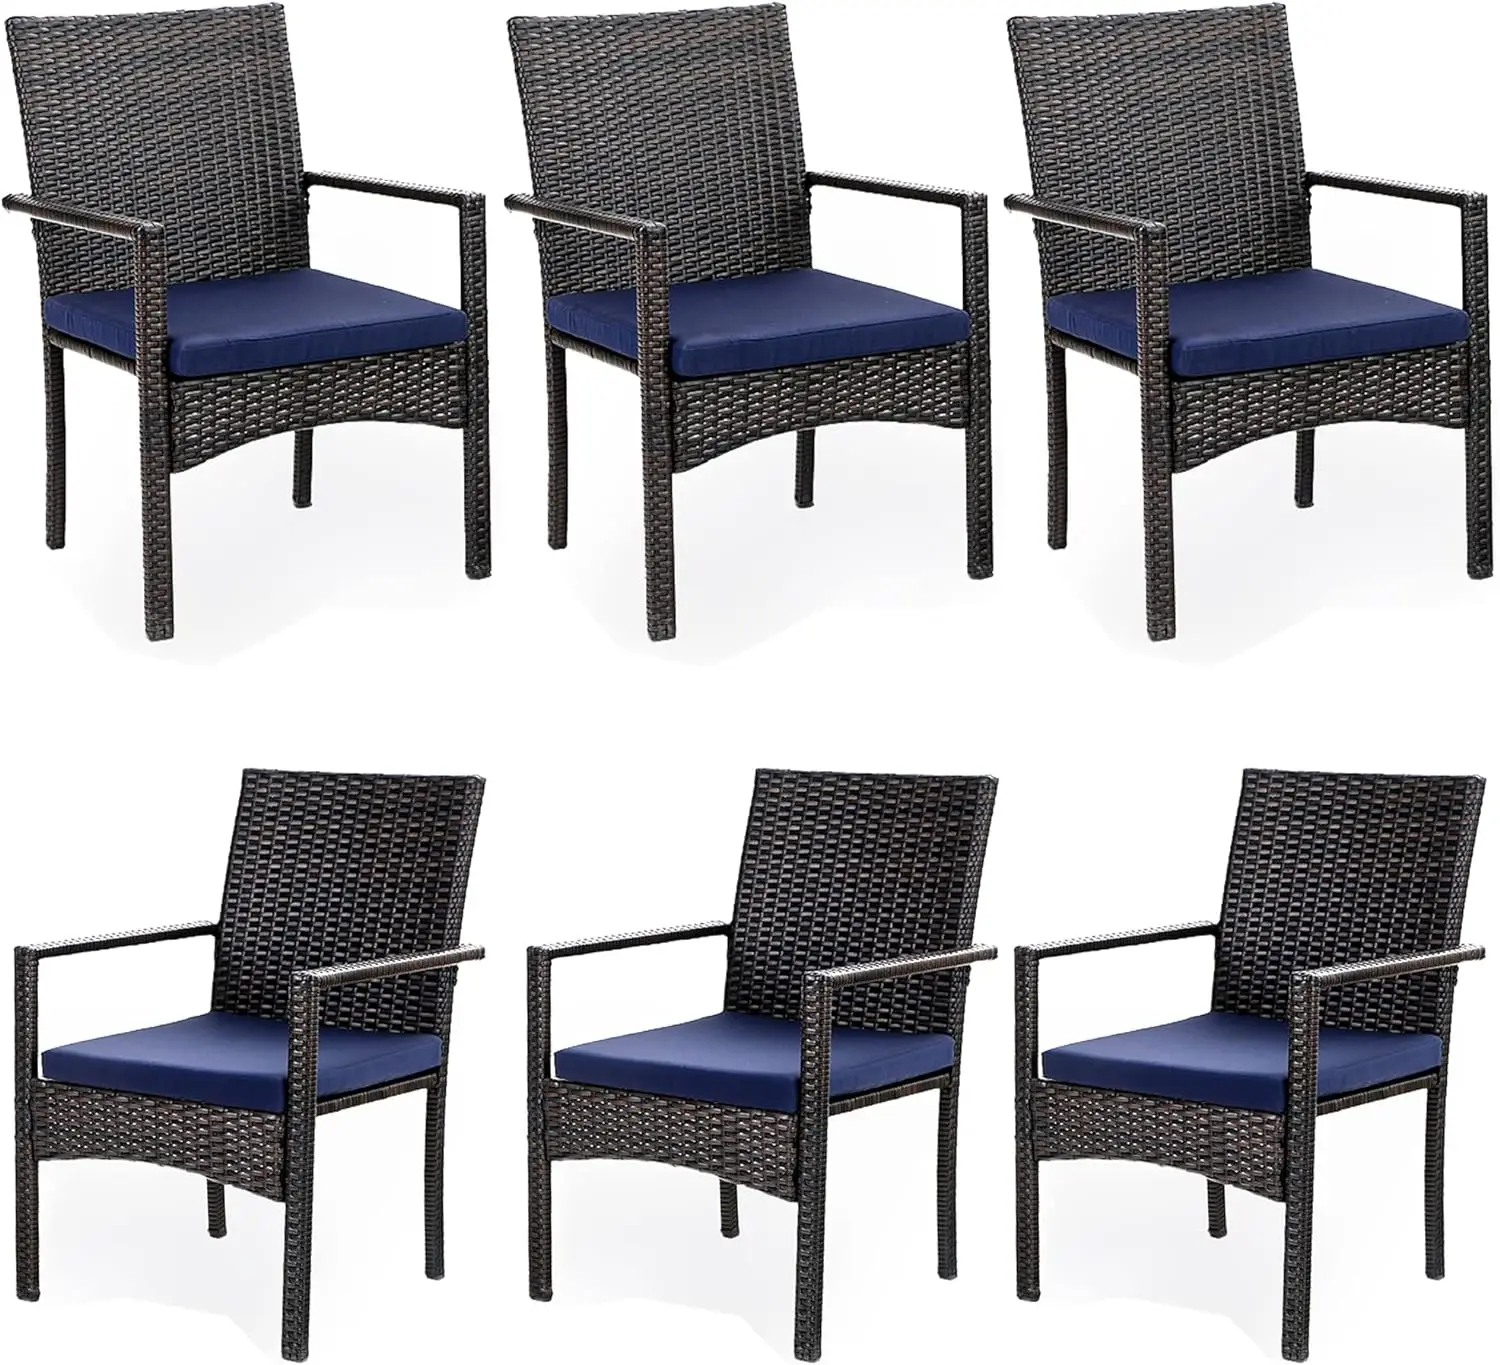 

Outdoor Rattan Dining Chairs Set of 6, Modern Wicker Armchair with Cushions for Patio, Deck, Yard, Porch